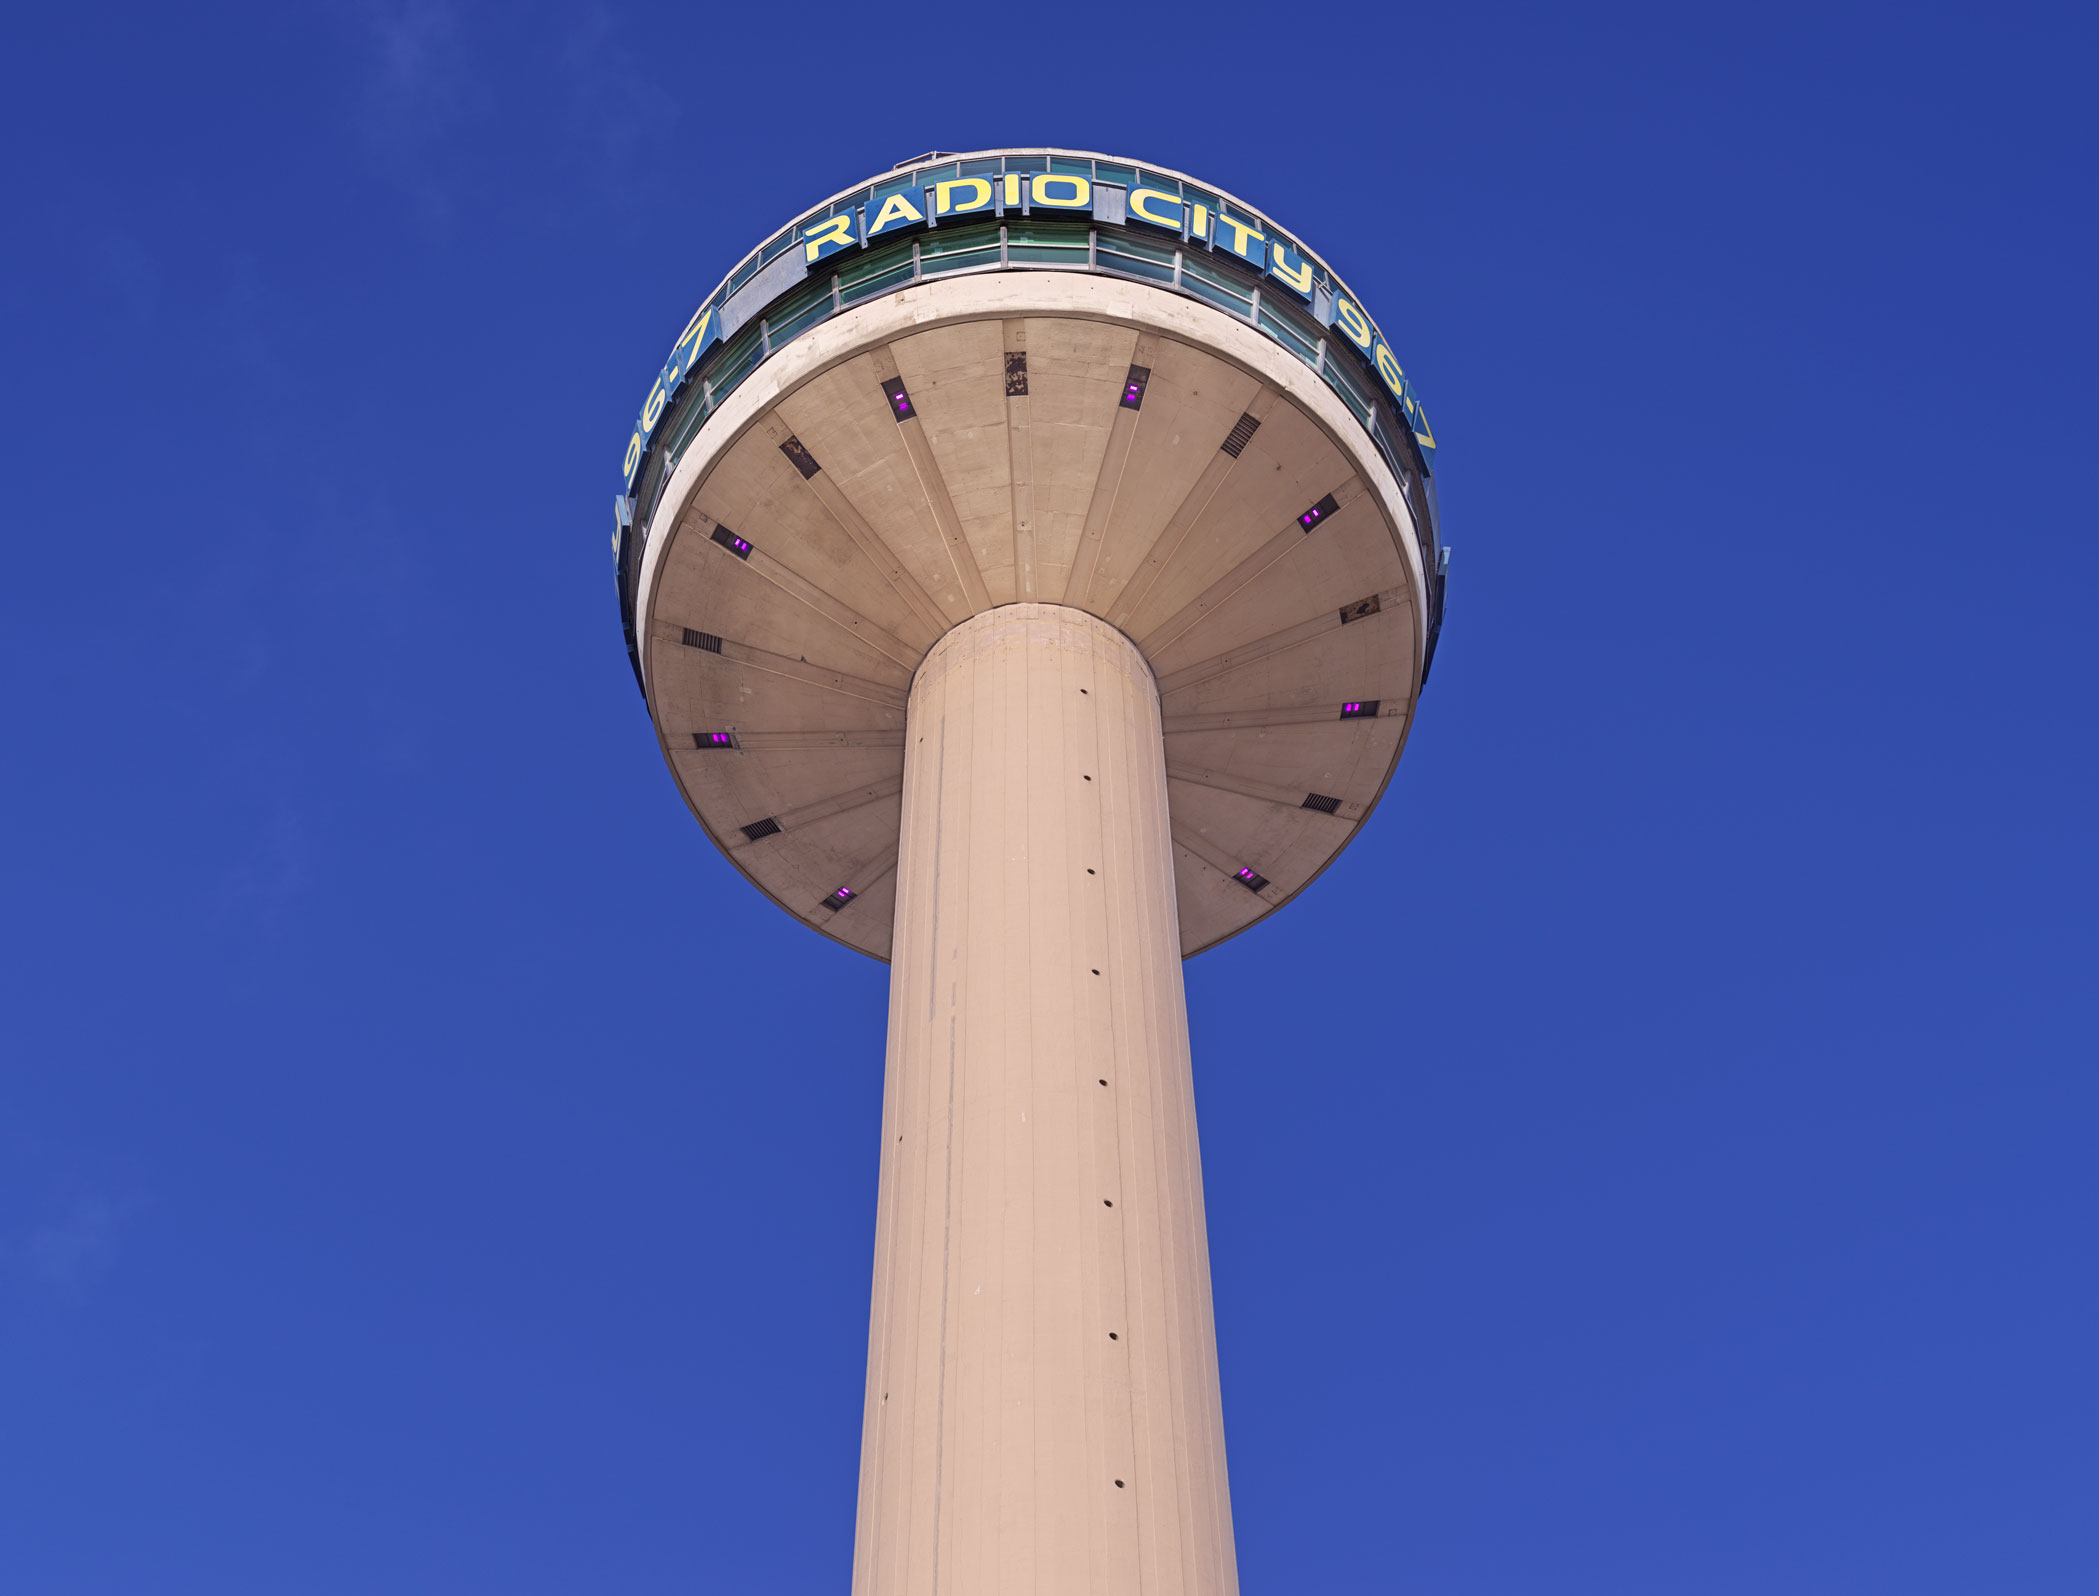 Photograph of the upper portion of a tall concrete radio tower with a circular viewing platform at the top.